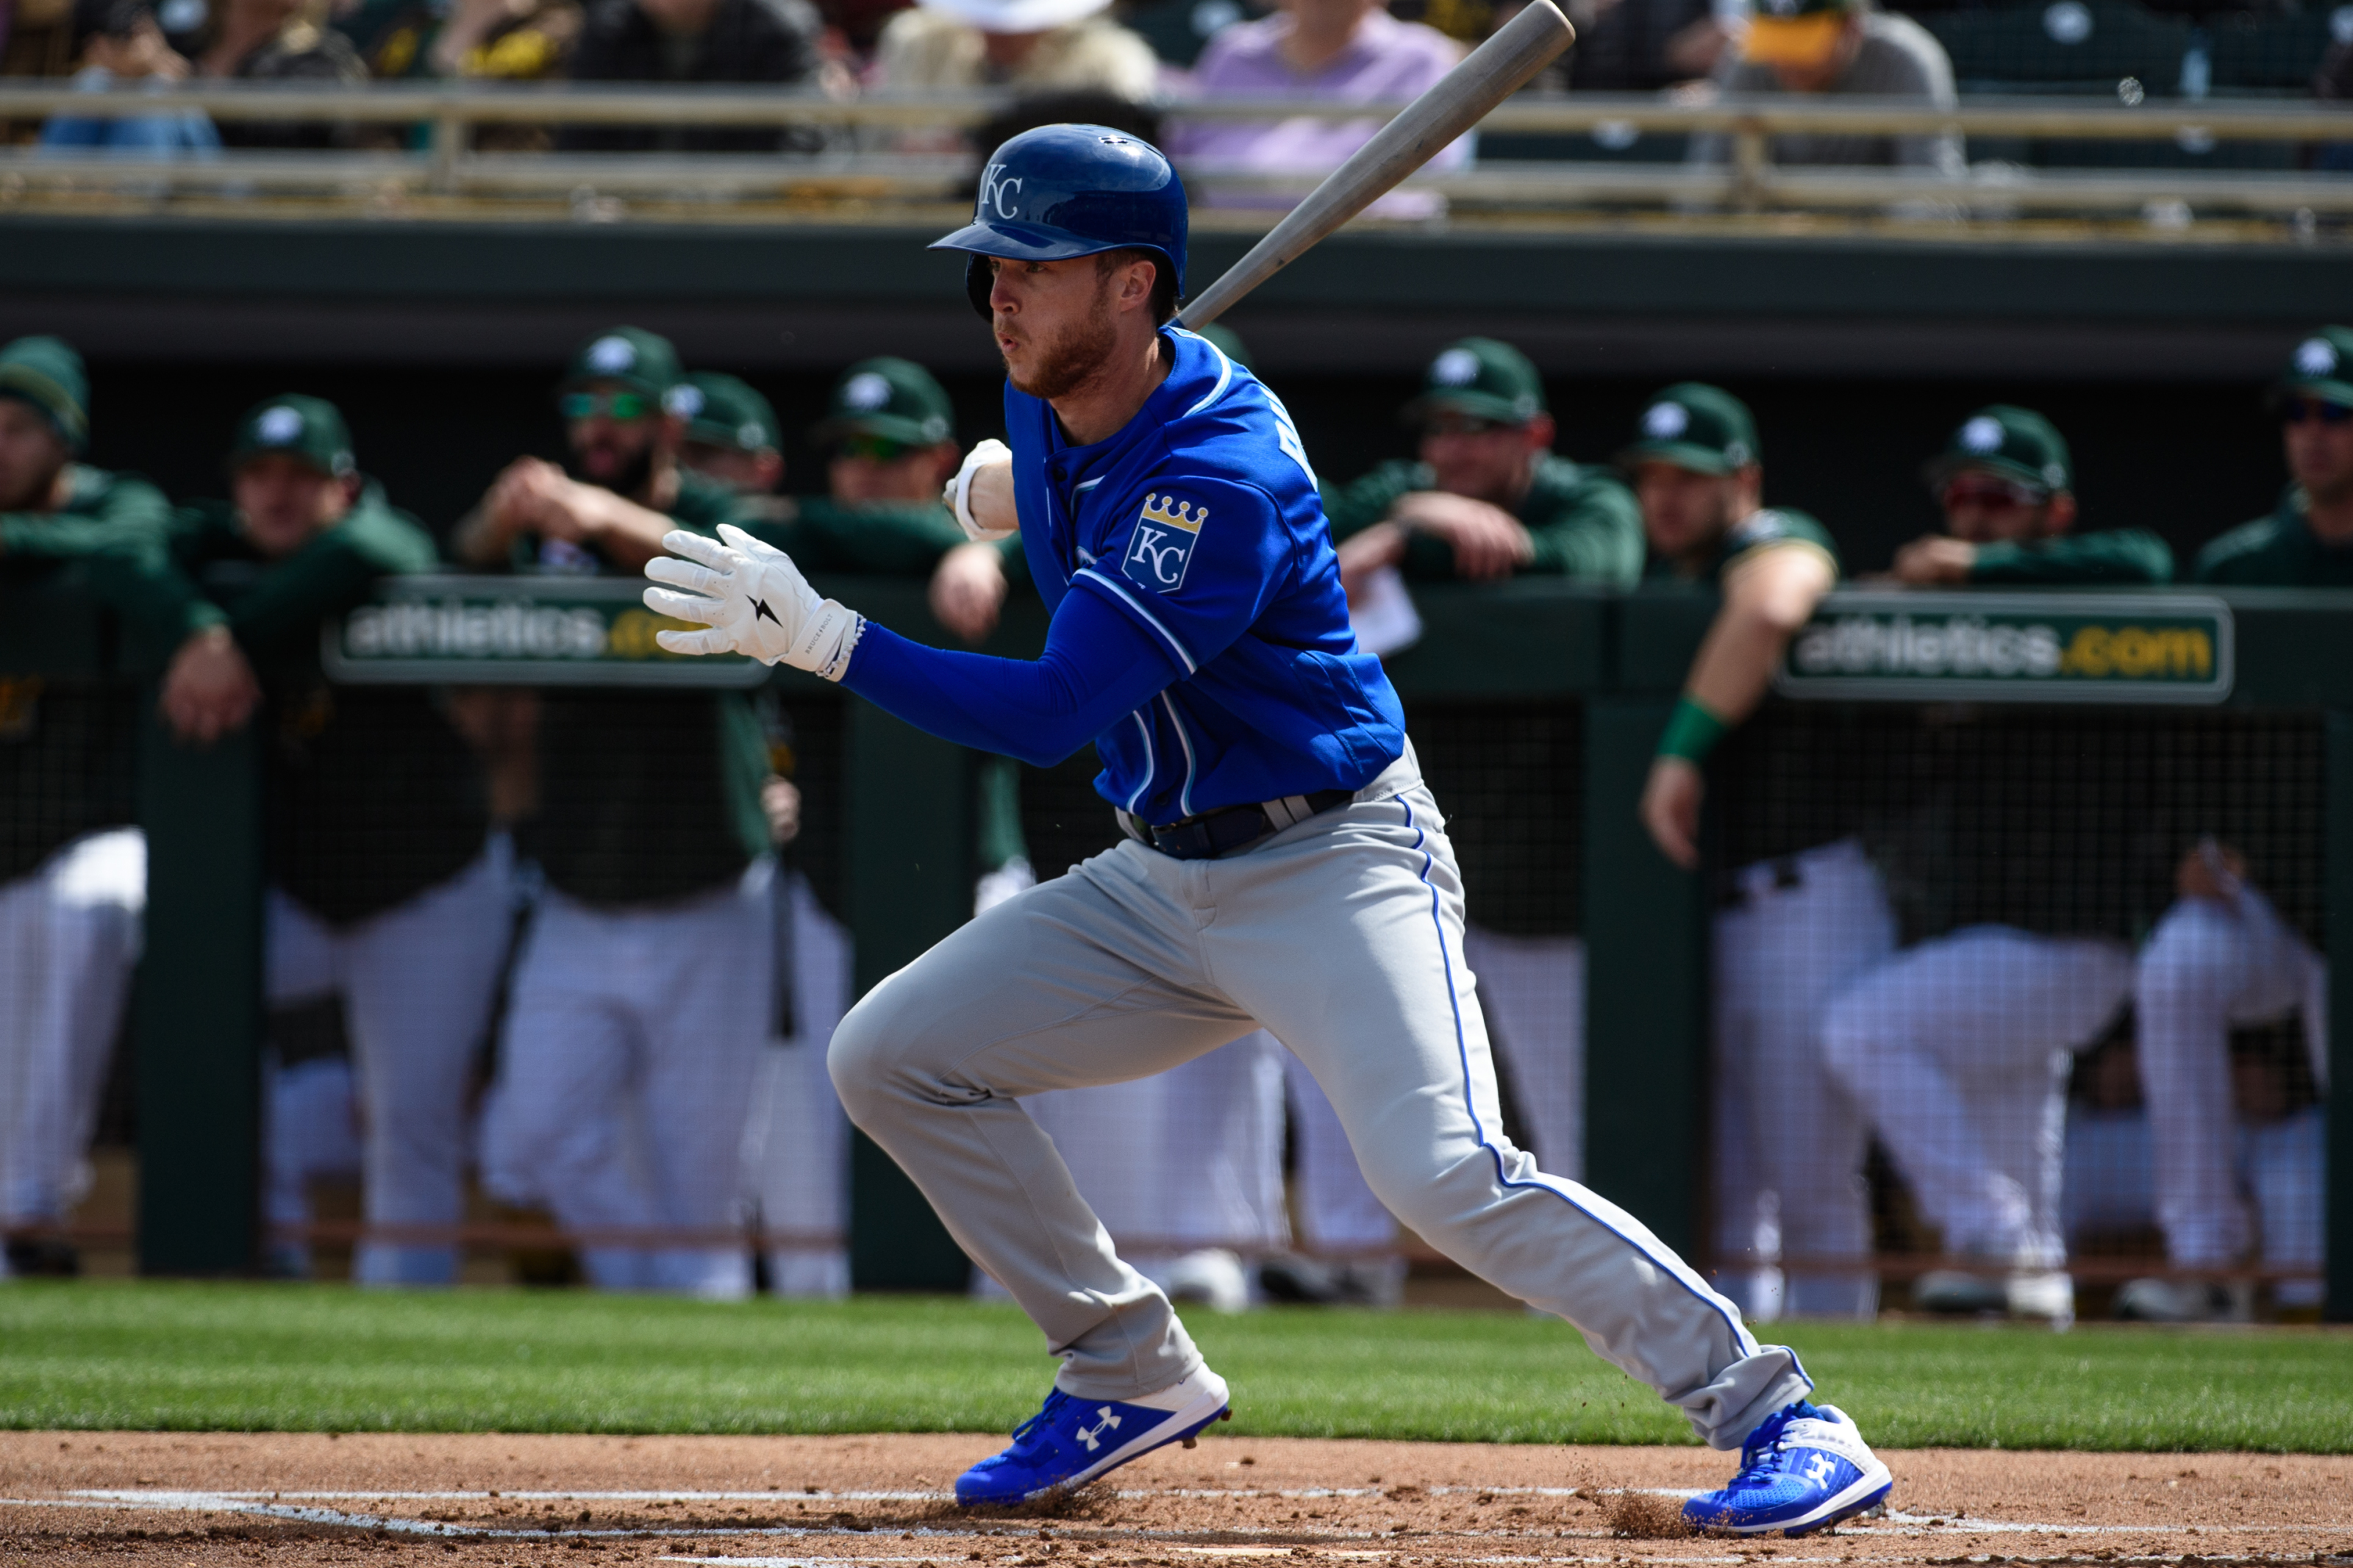 Royals trade Moustakas to Brewers for two minor-leaguers